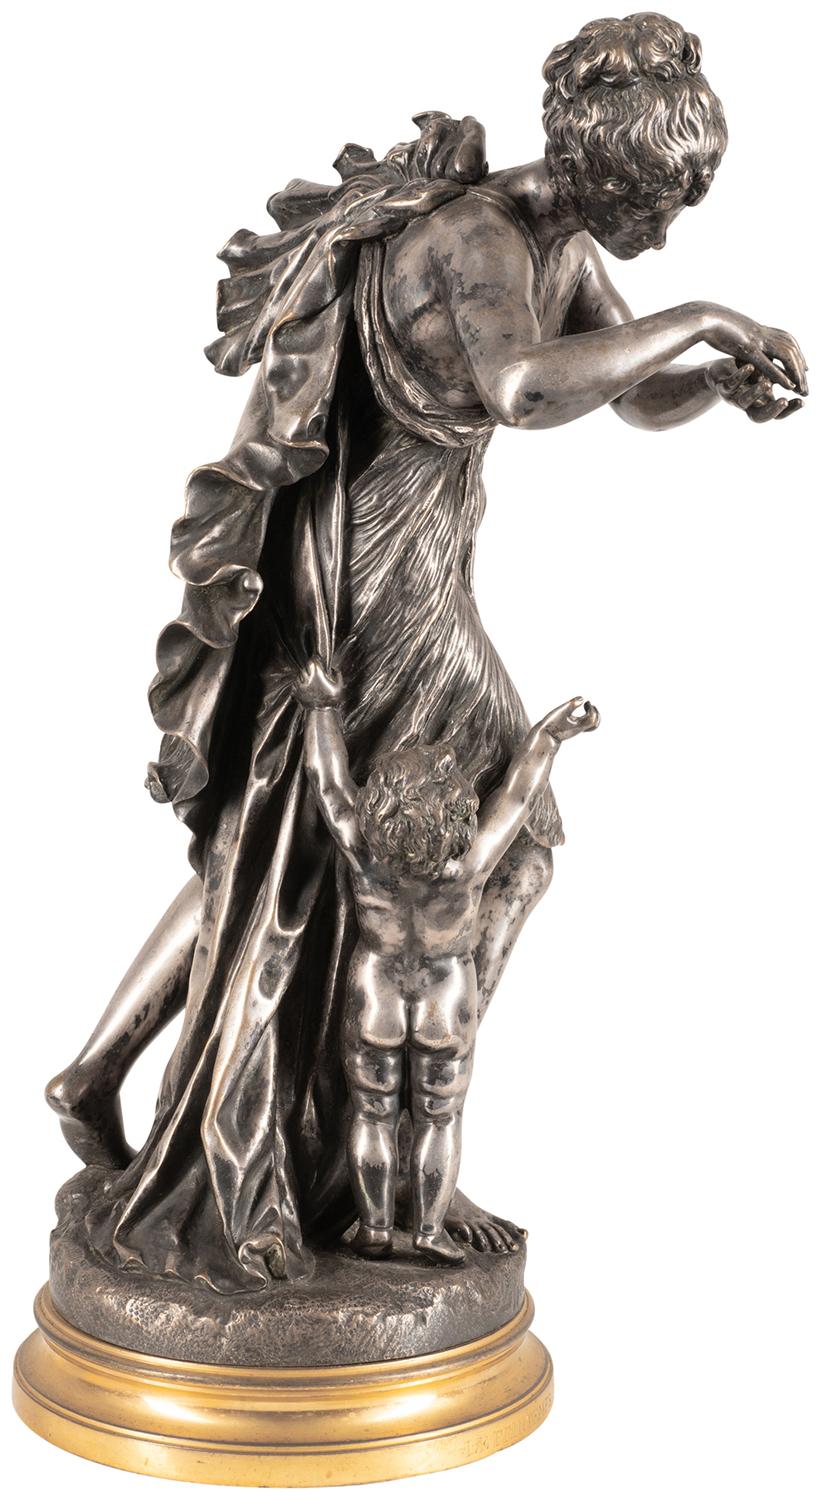 A very good quality 19th century silvered bronze statue entitled 'The Spring of Life', depicting a mother and child. Signed; A.G.Lanzirotti, Paris.